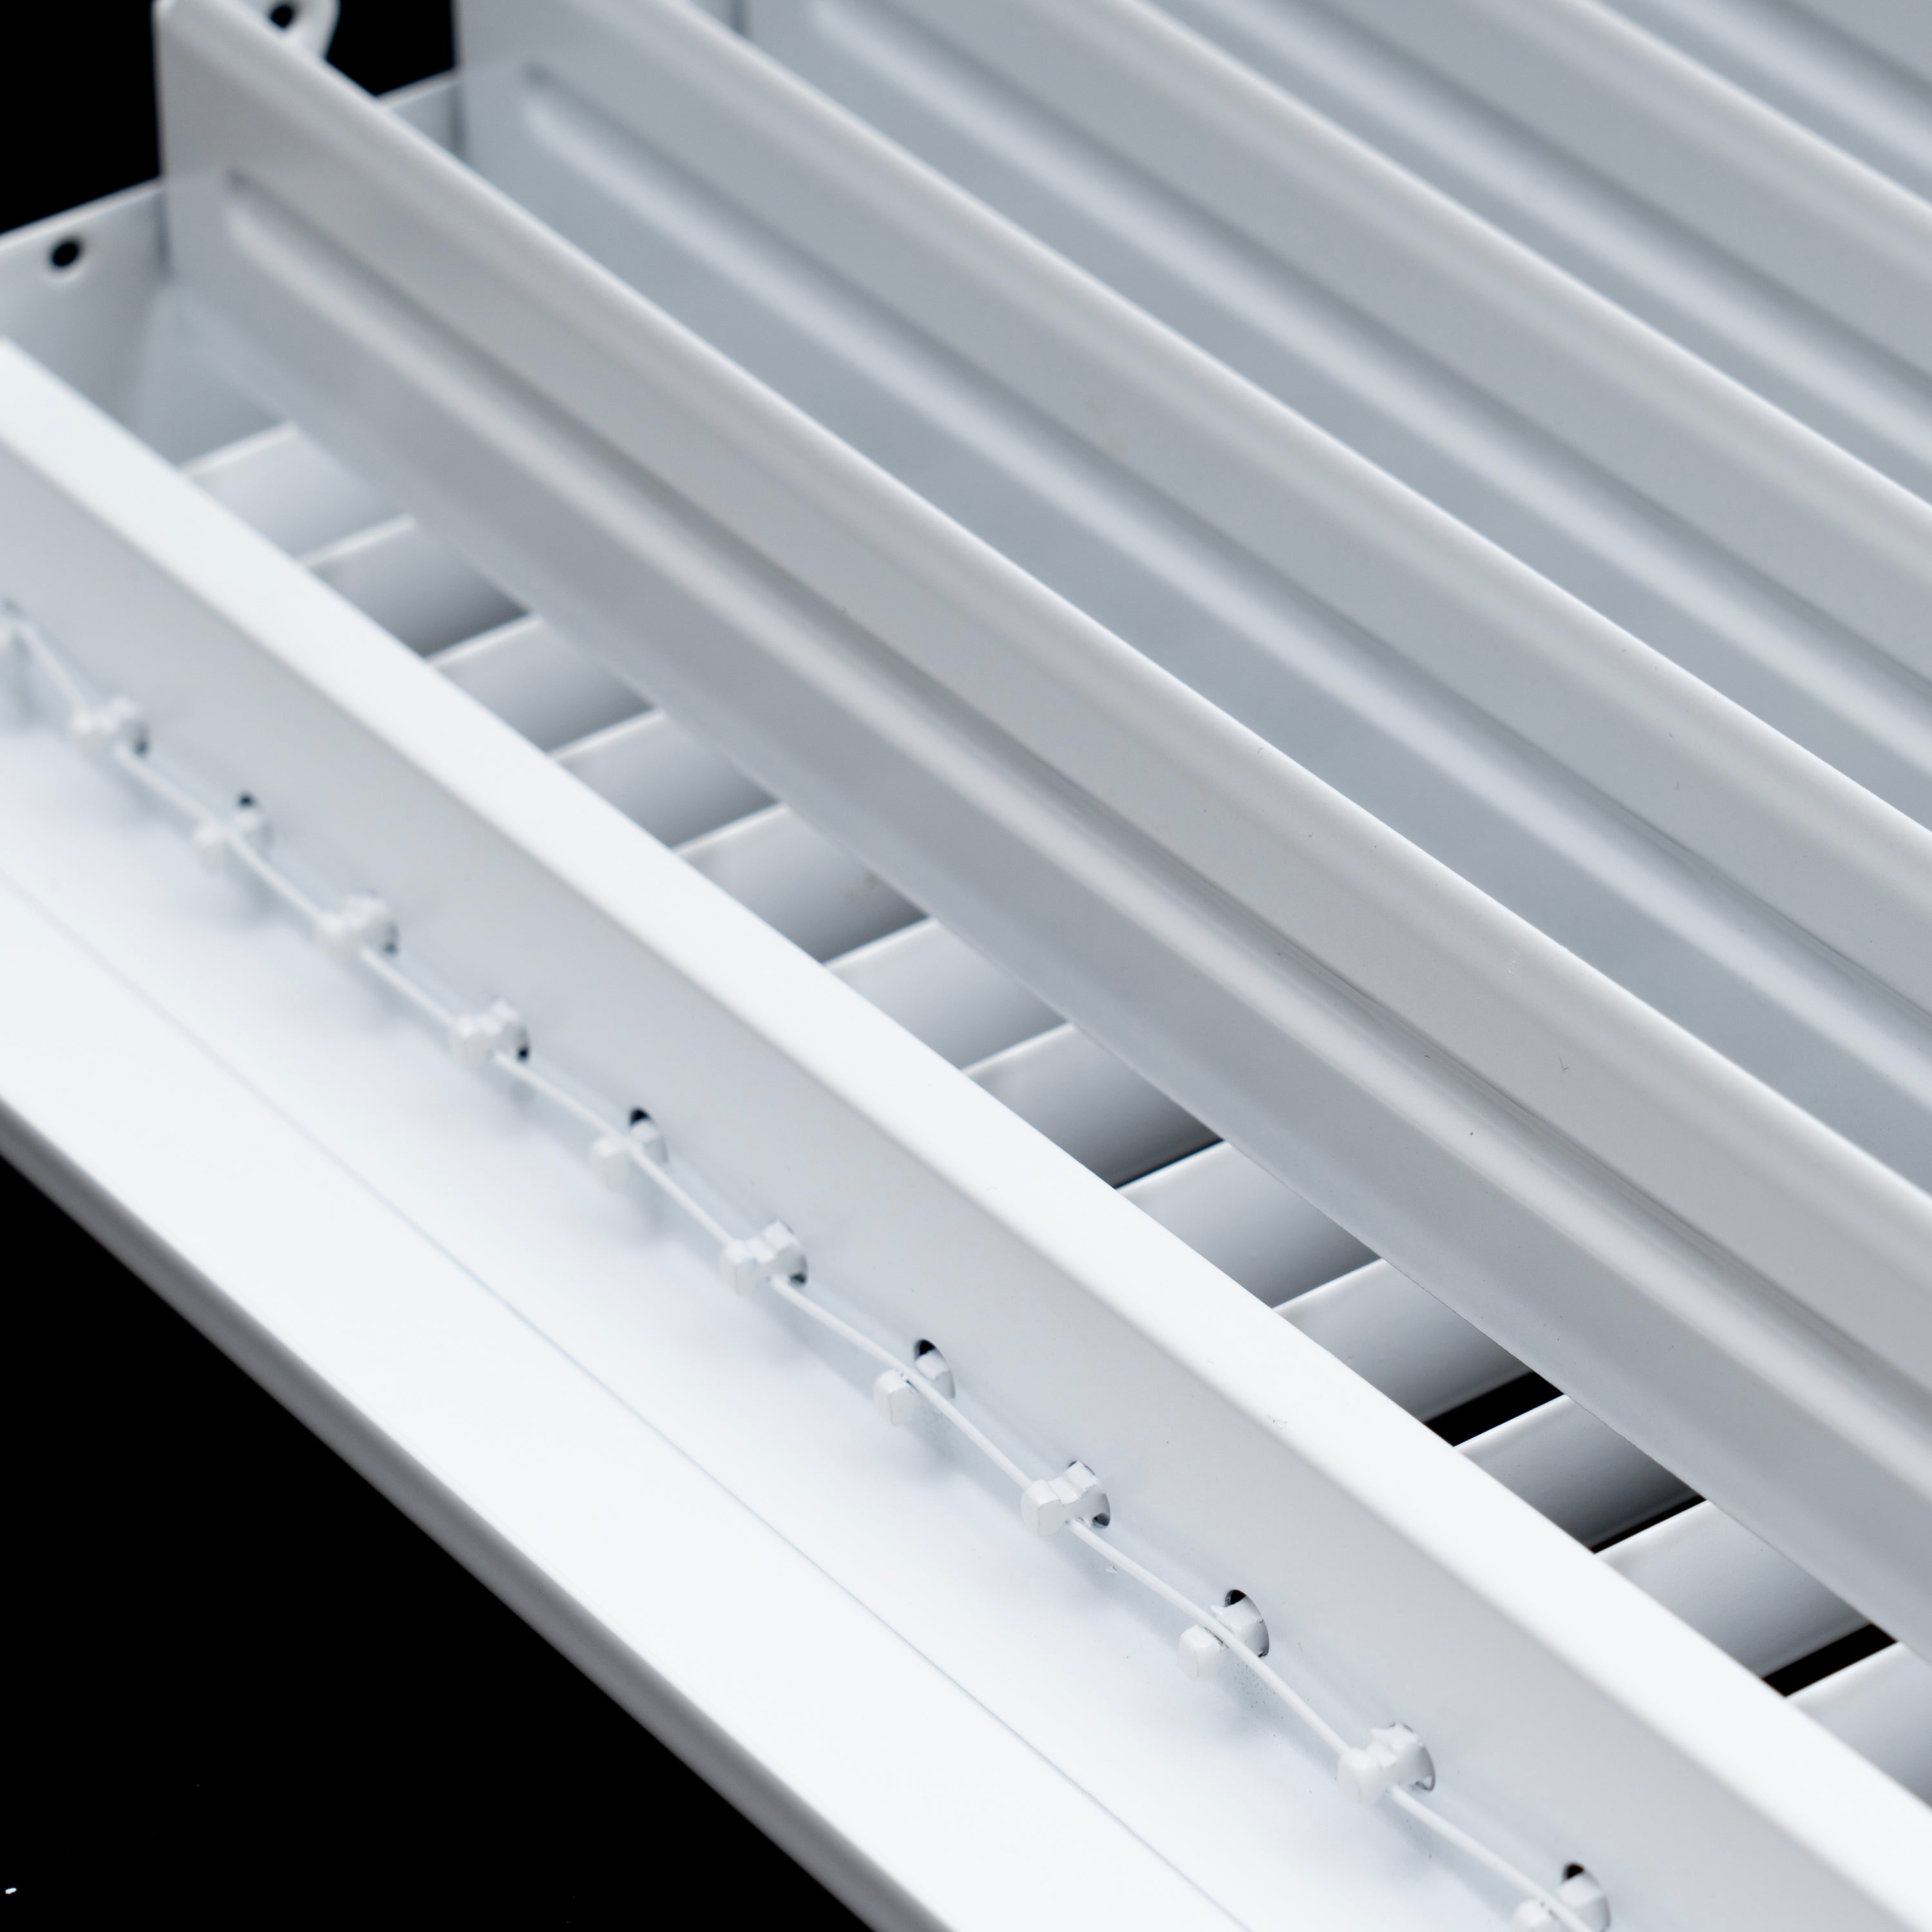 6"W x 6"H  Steel Adjustable Air Supply Grille | Register Vent Cover Grill for Sidewall and Ceiling | White | Outer Dimensions: 7.75"W X 7.75"H for 6x6 Duct Opening